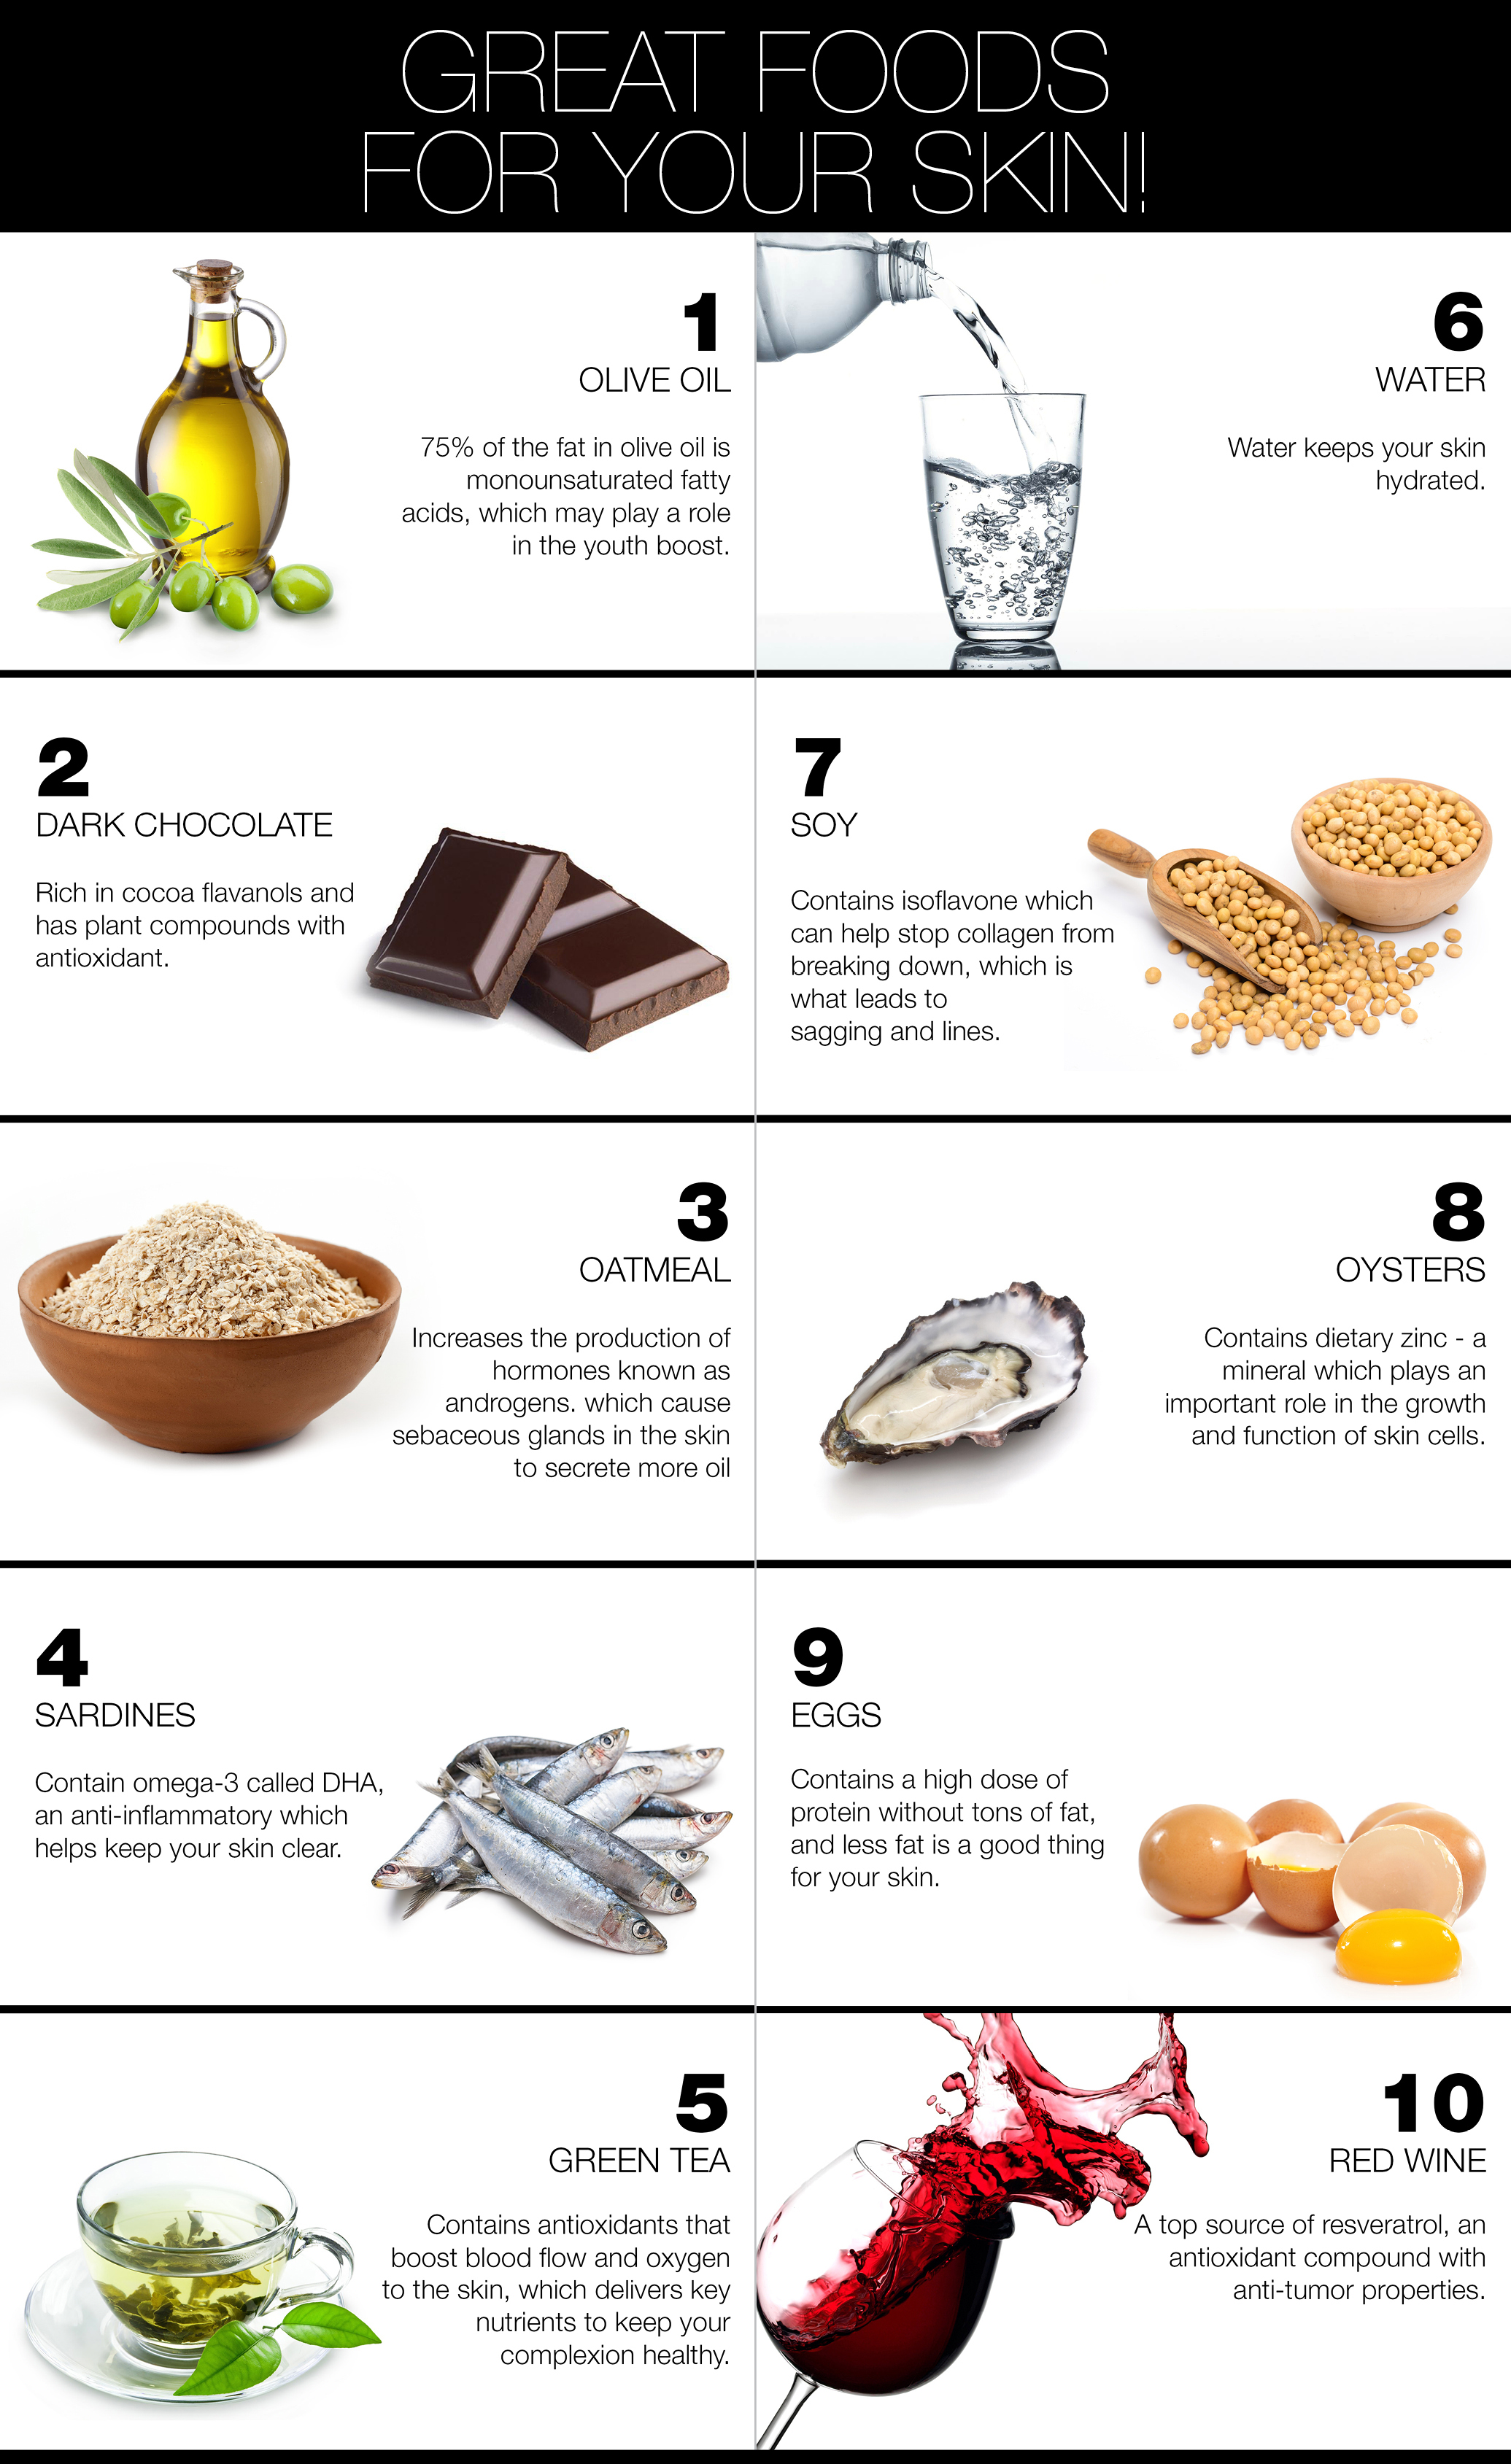 Foods have beneficial properties for your skin!